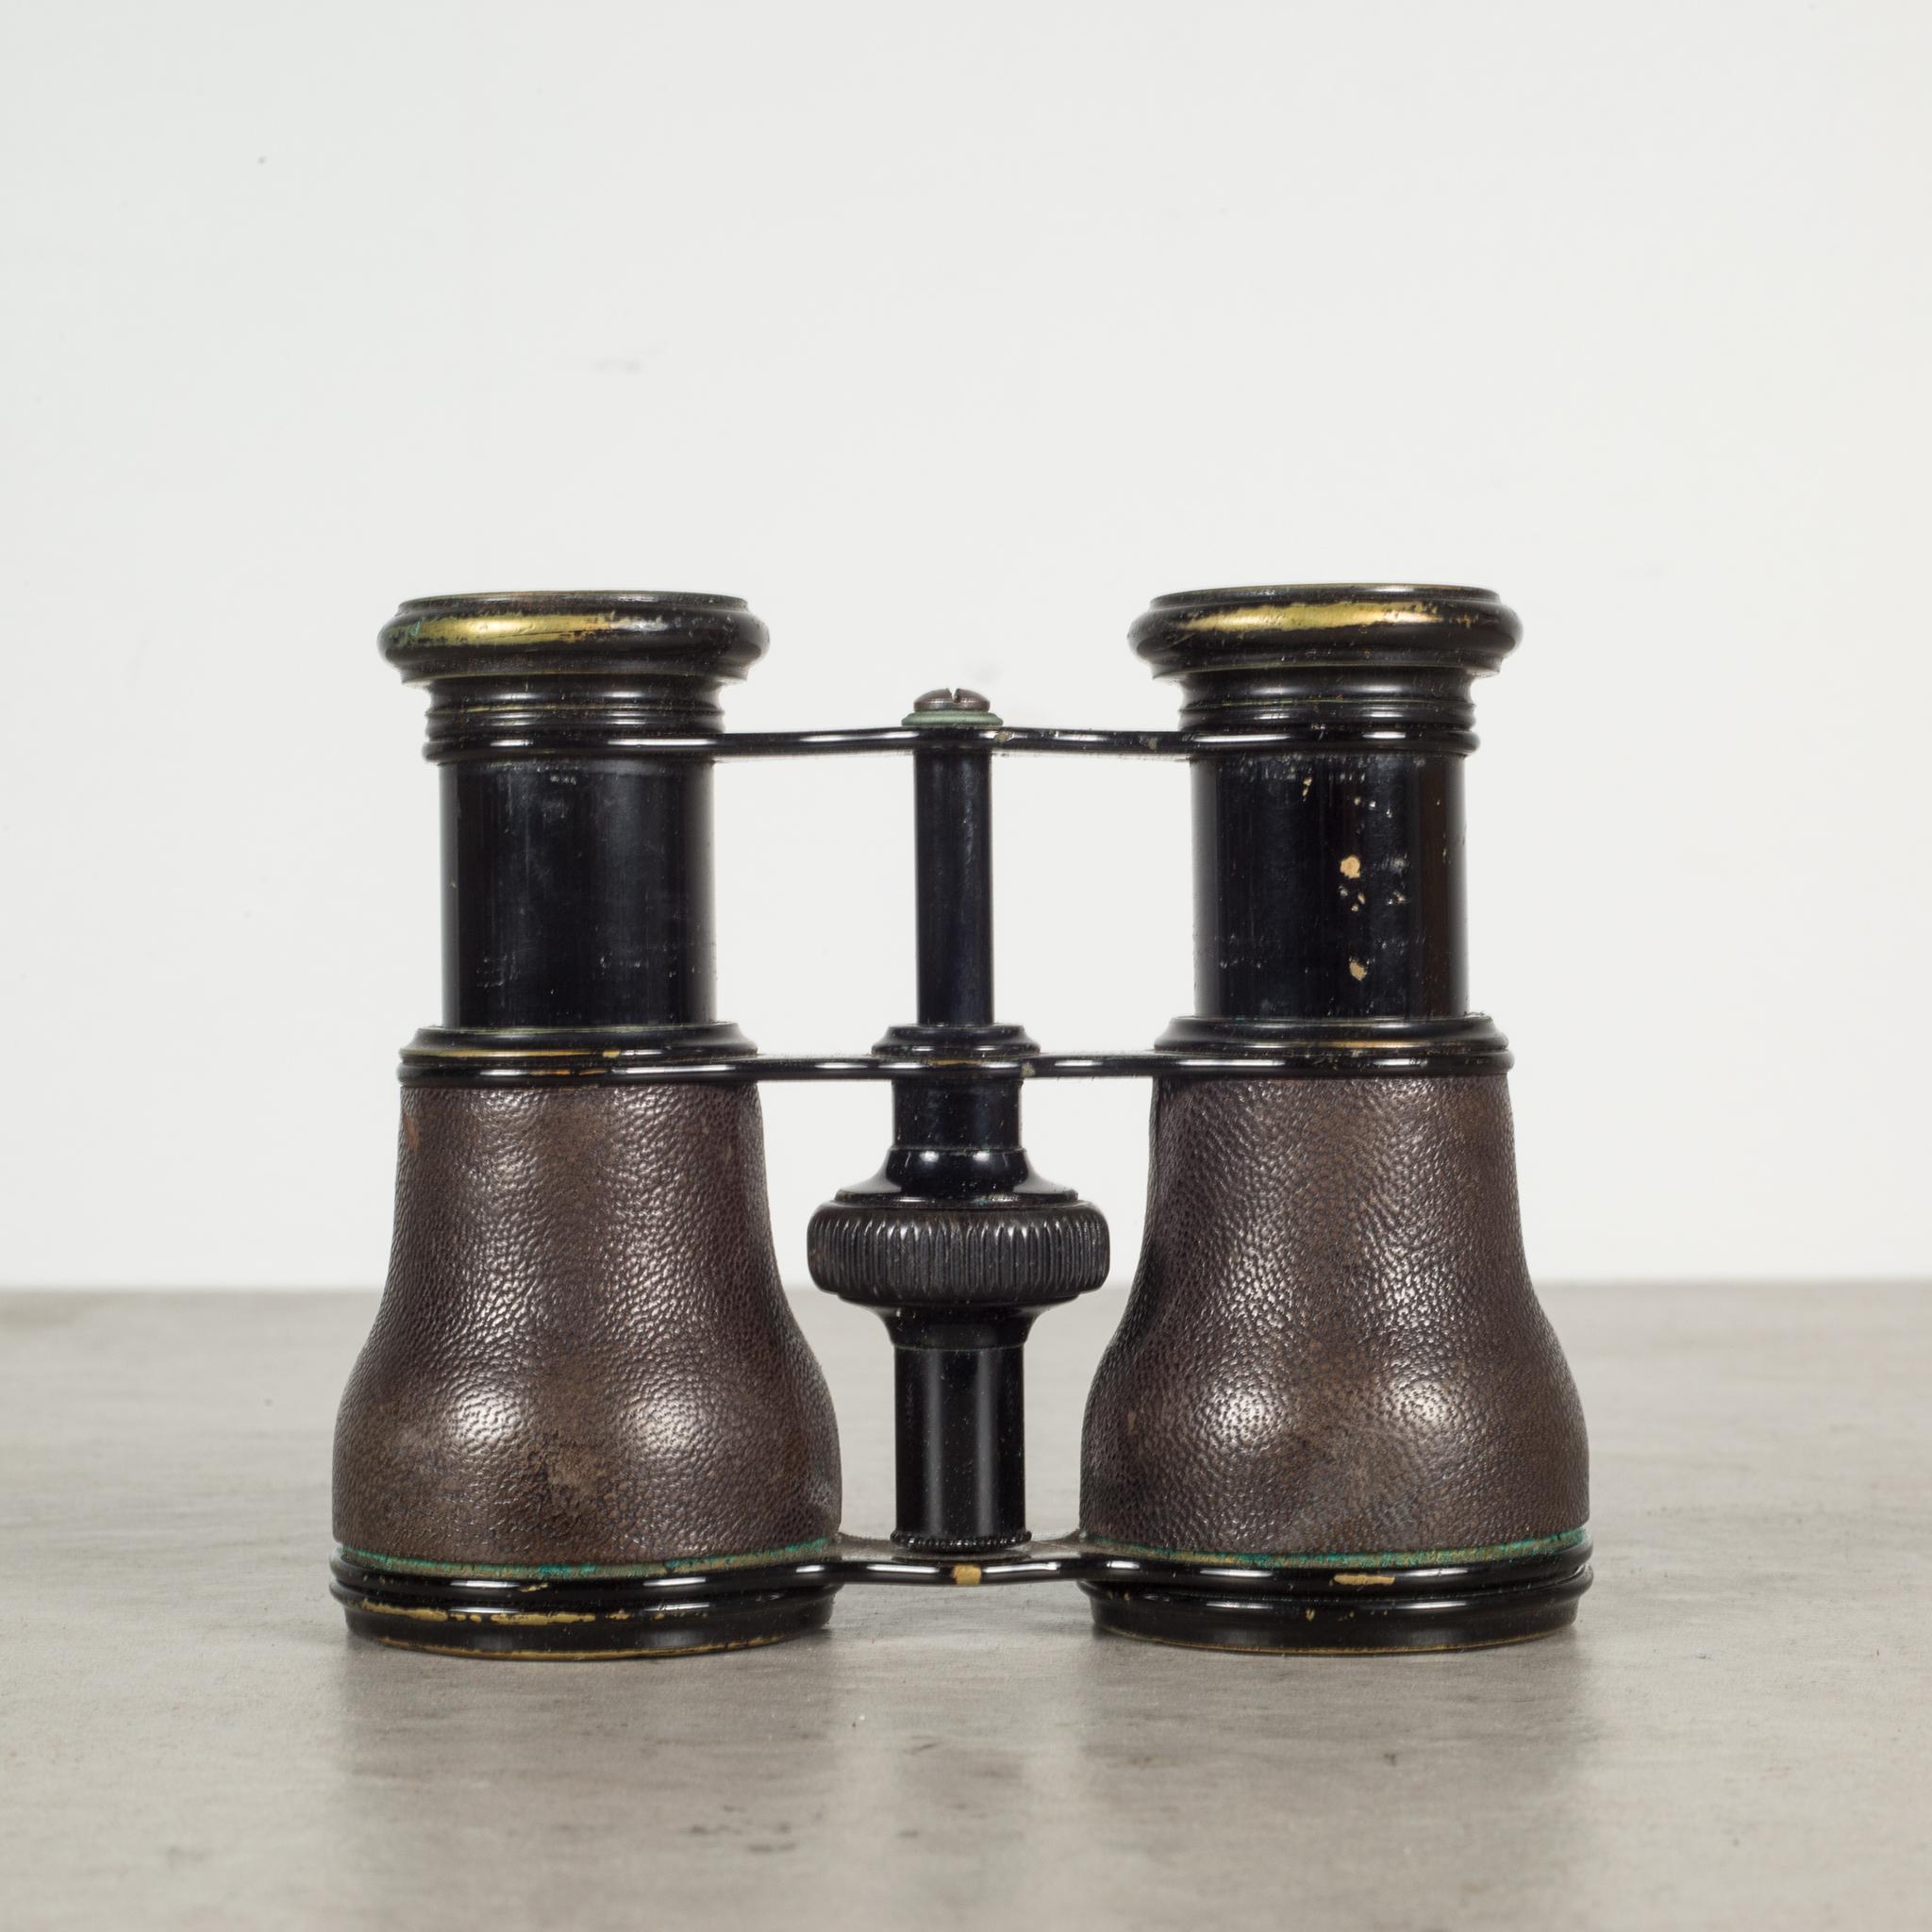 About

A pair of 19th century leather wrapped binoculars with original leather case. Good working order with clear binocular viewing. This piece has retained its original finish

 CreatorLeMaire, Paris, France.
Date of manufacture